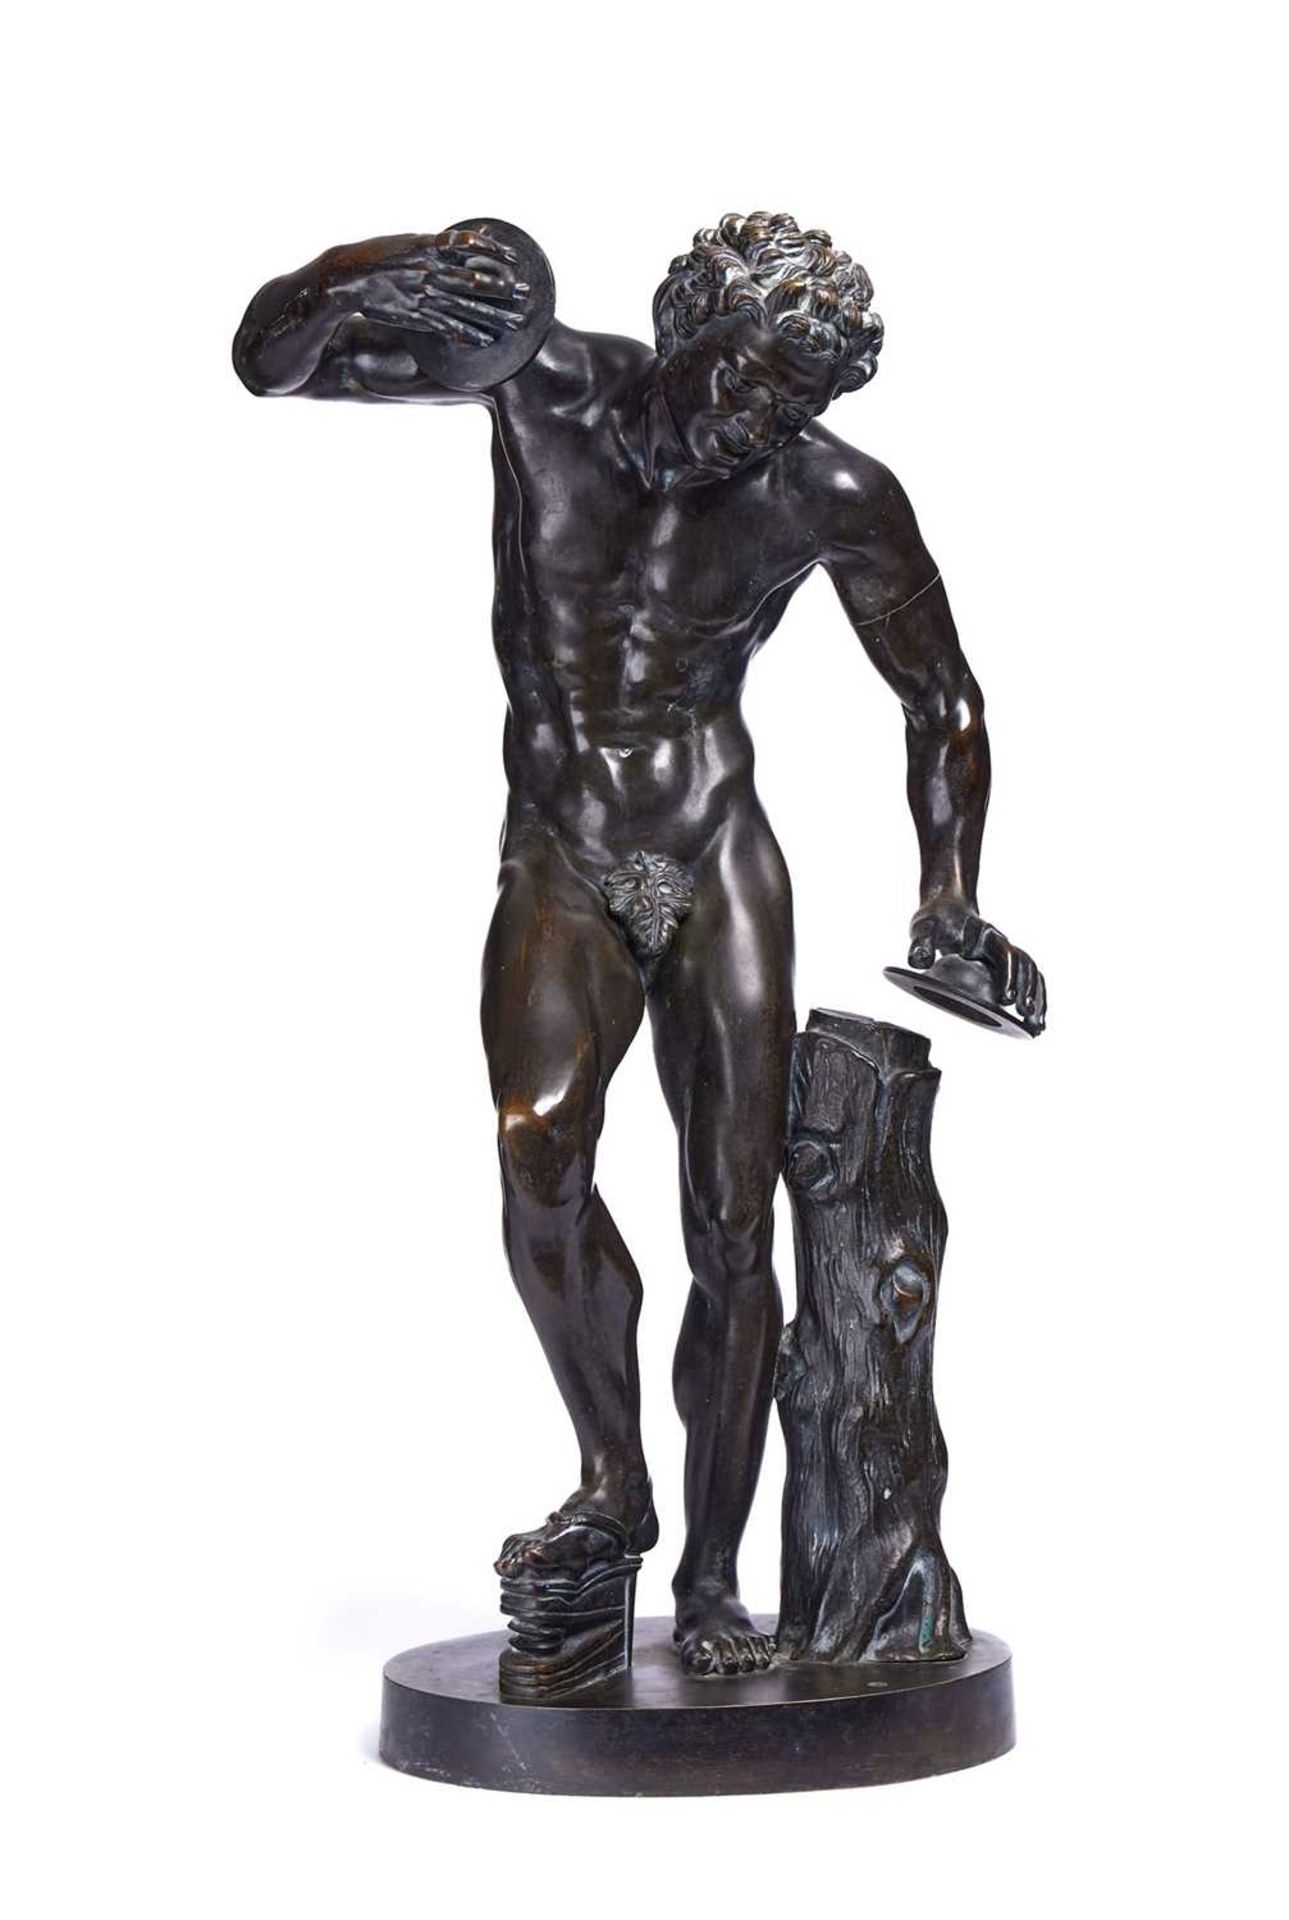 AFTER THE ANTIQUE: A 19TH CENTURY BRONZE OF THE DANCING FAUN WITH CYMBALS - Image 2 of 9